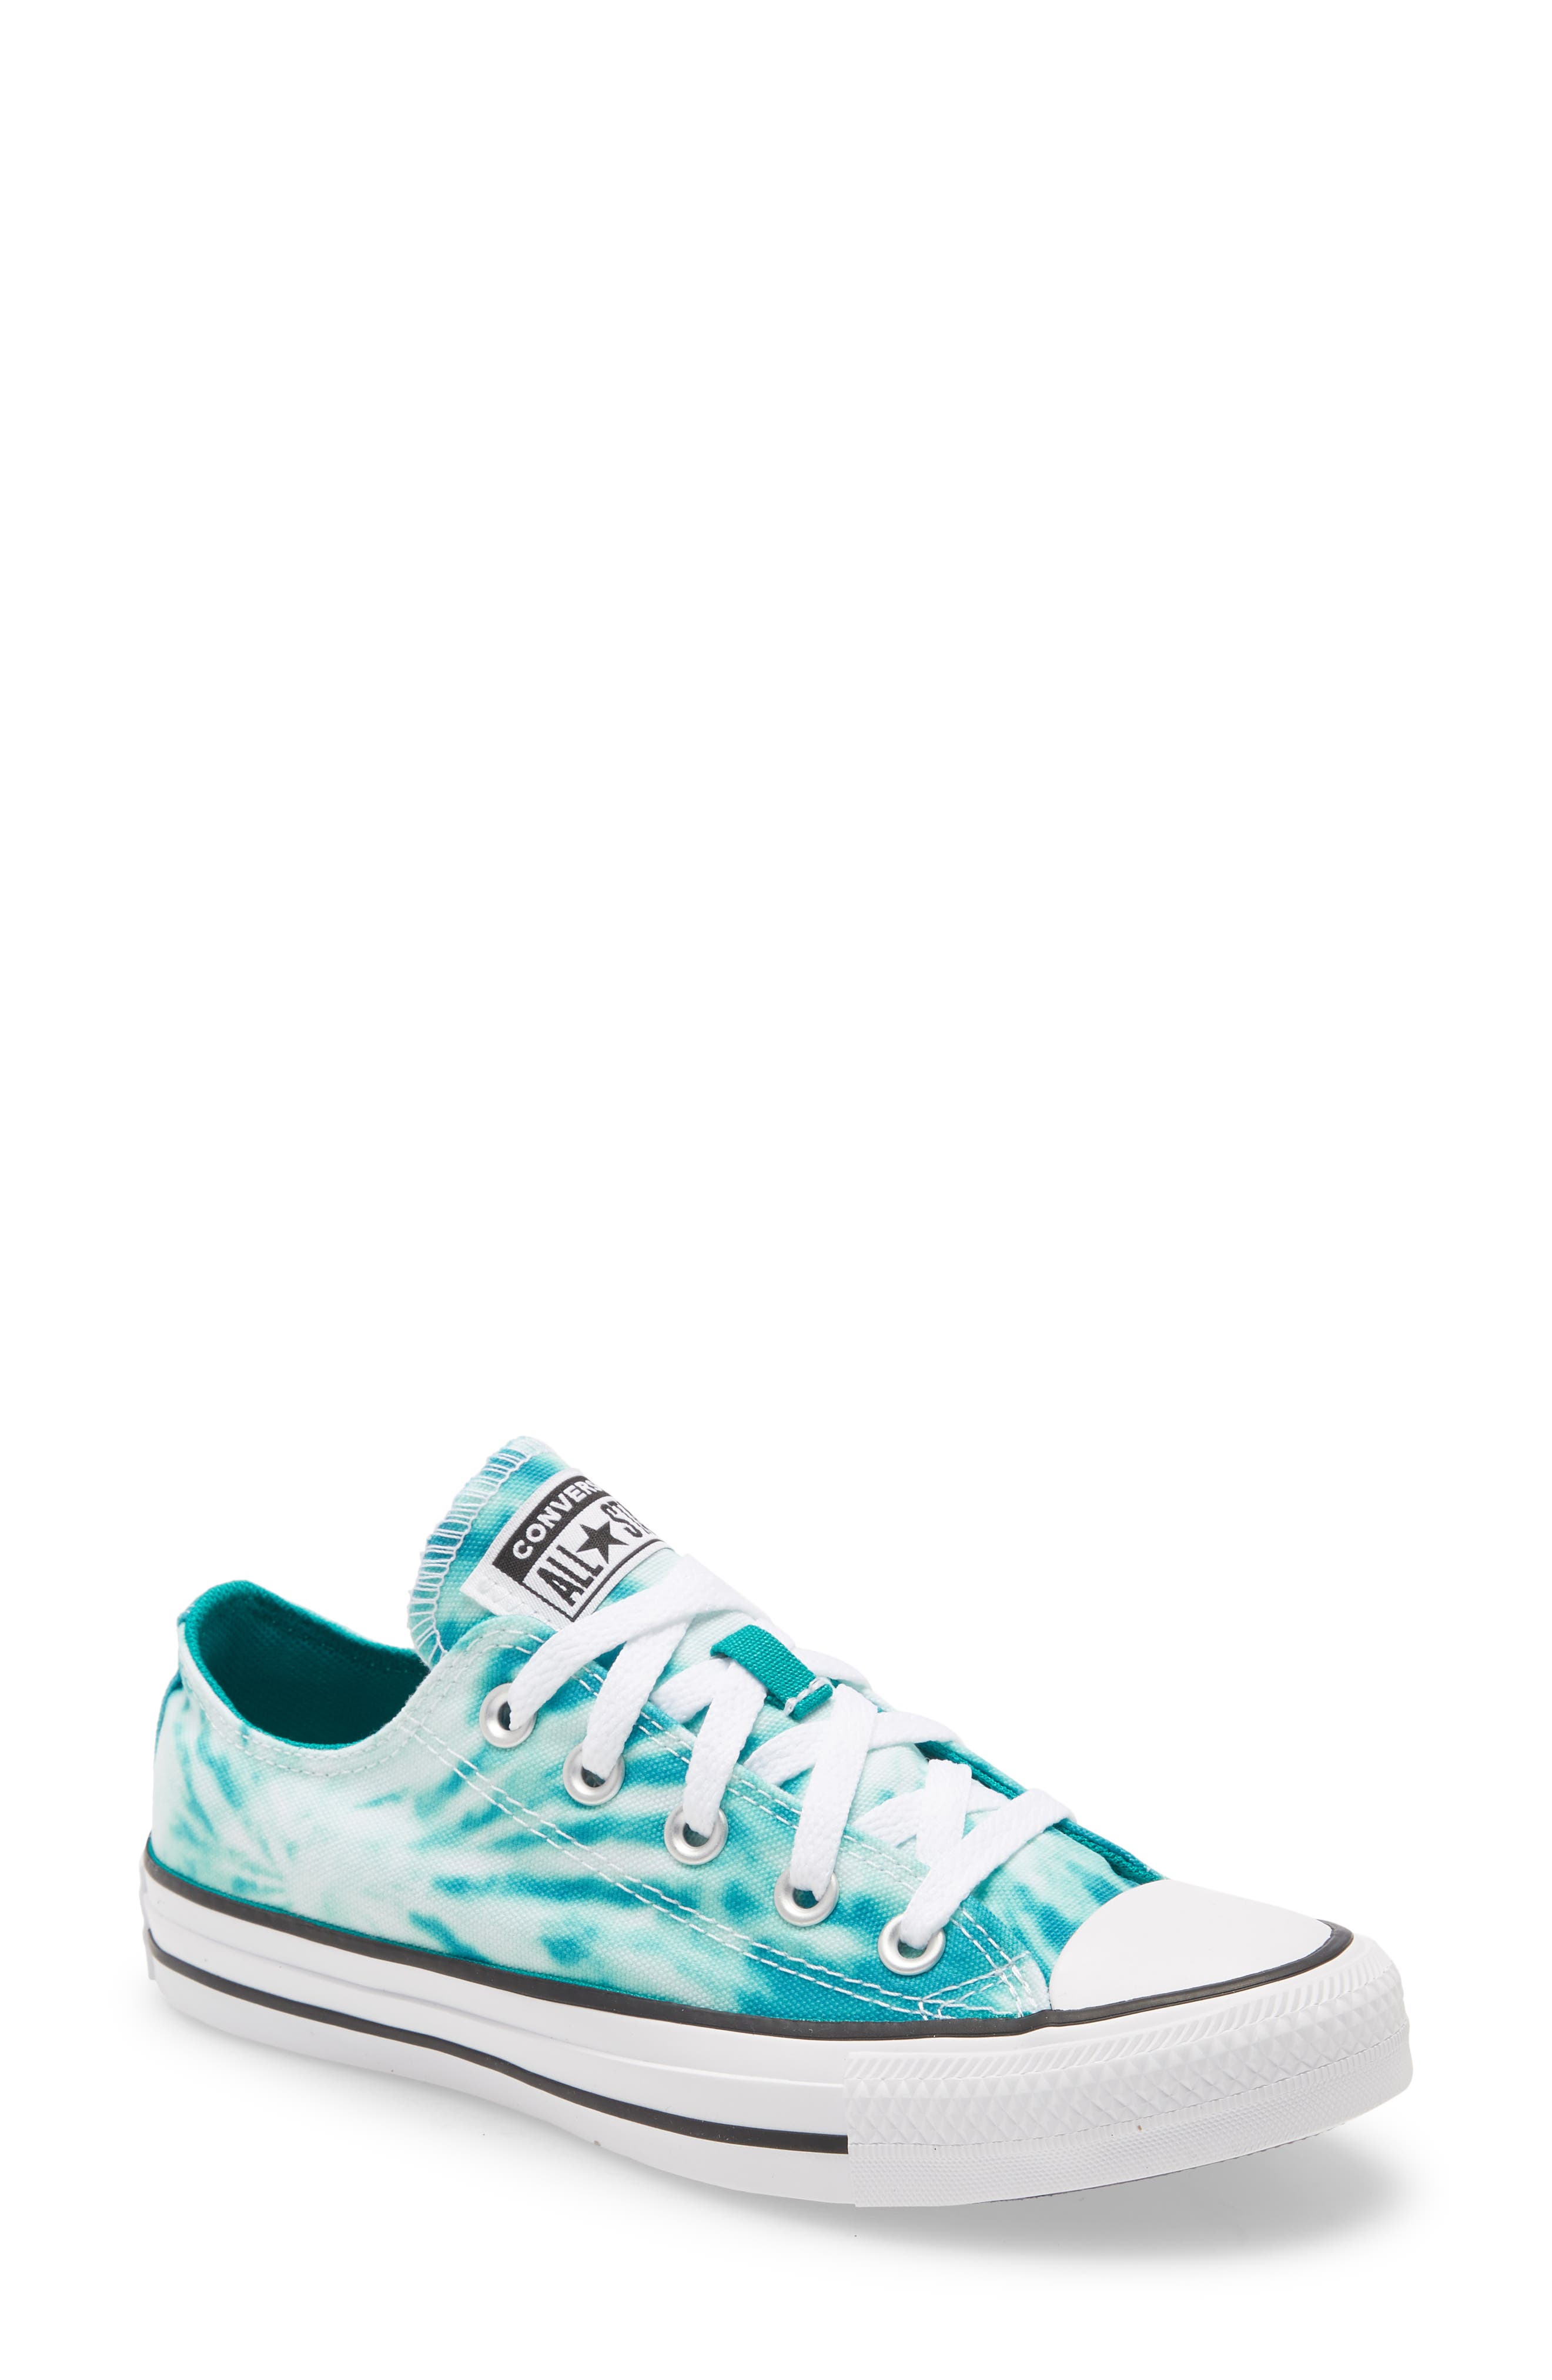 converse turquoise low tops